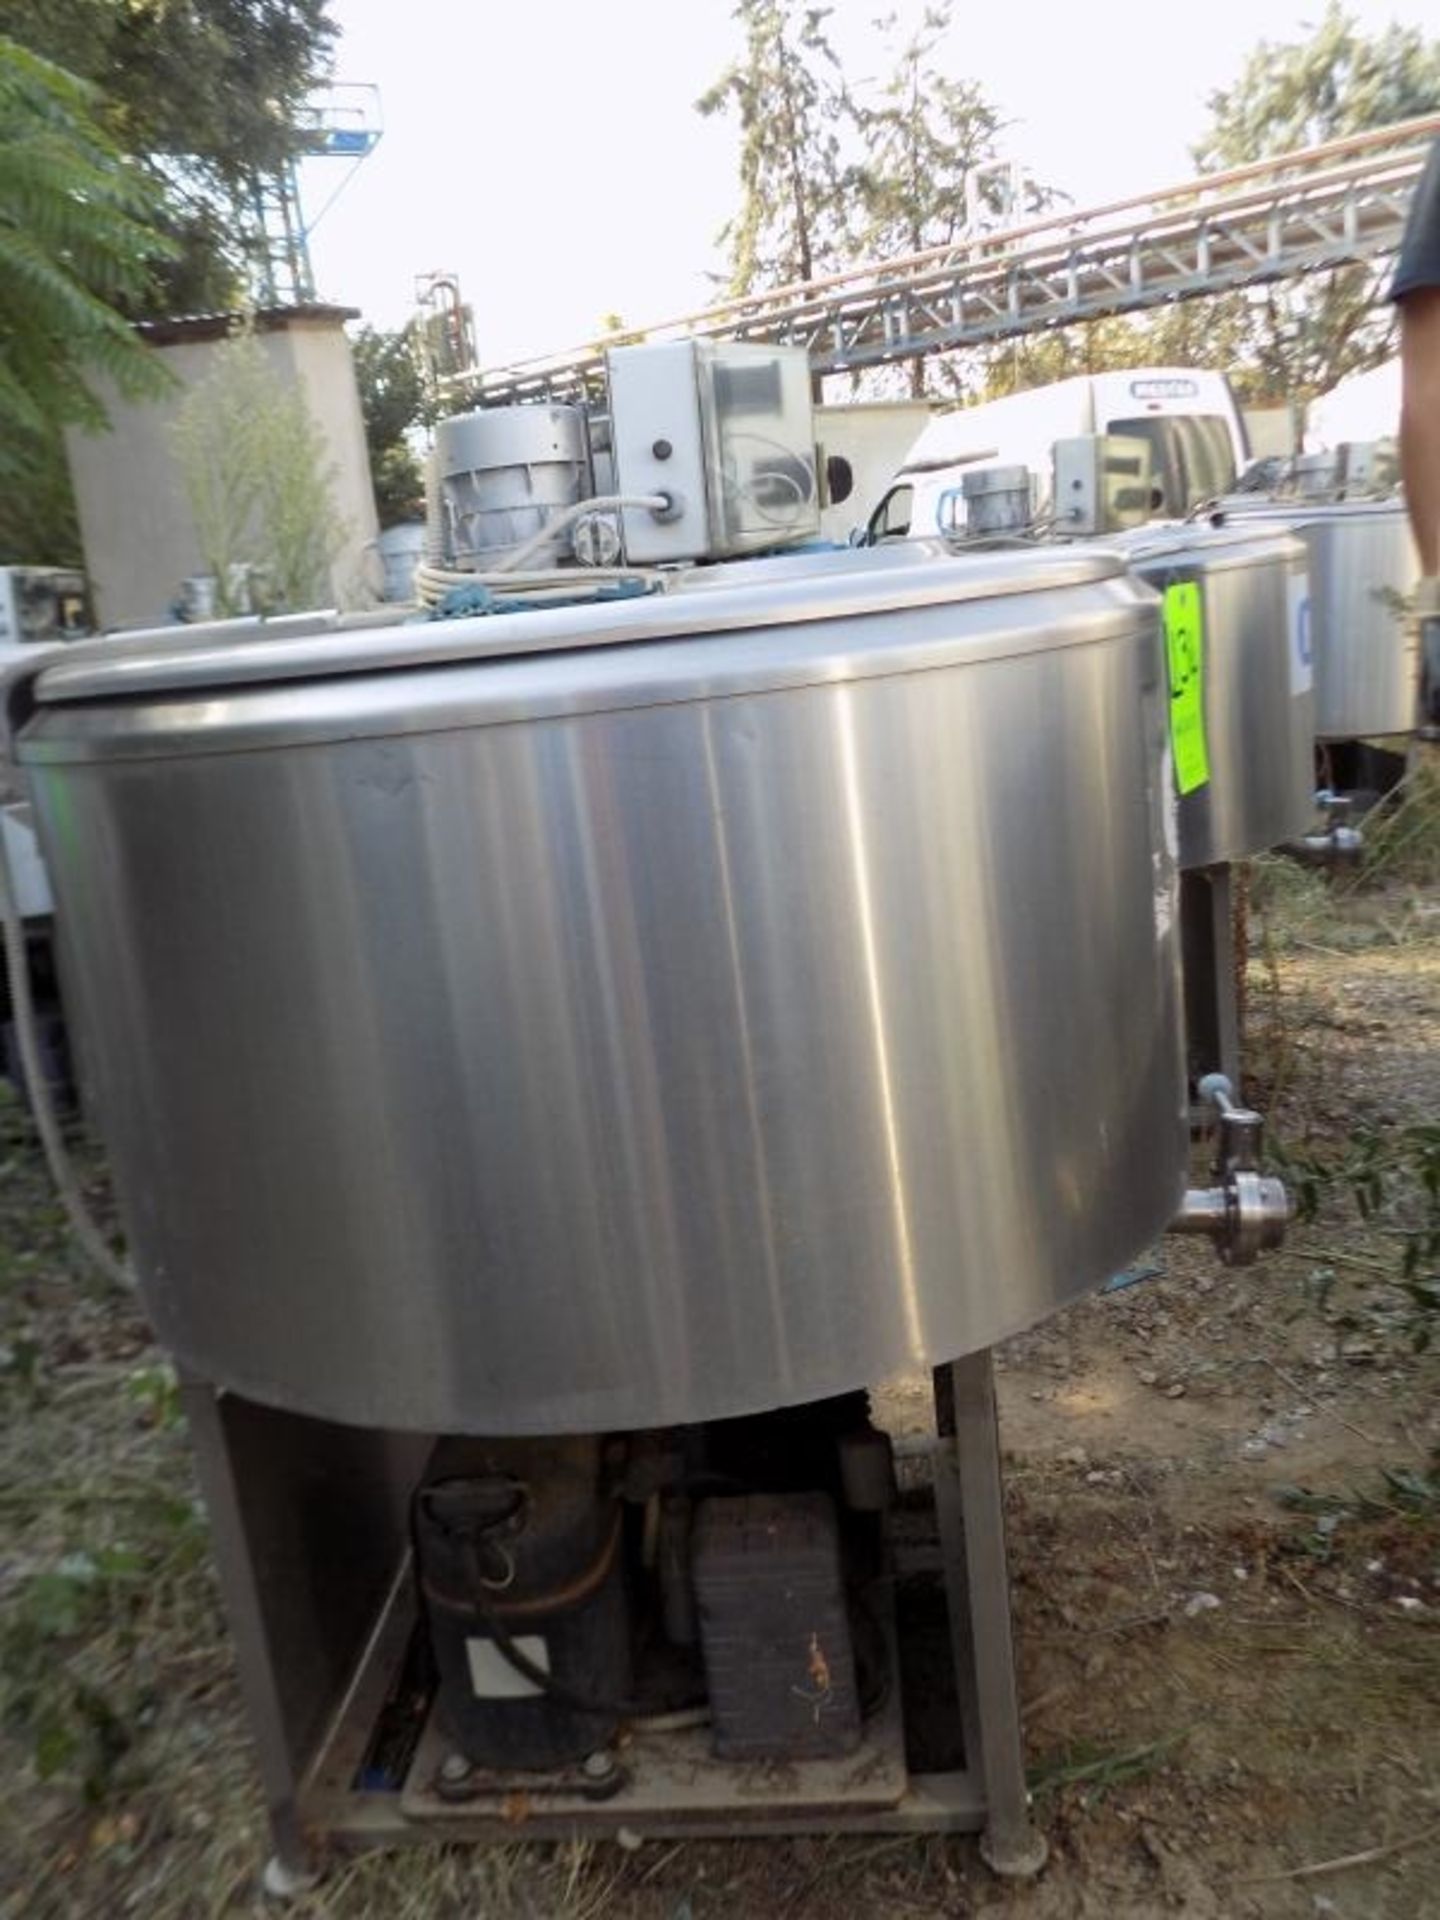 Ermicon (Packo) Aprox. 200L/52 Gal. S/S Jacketed Farm Tank with Hinged Lid, Twin Blade Prop, Motor - Image 4 of 4